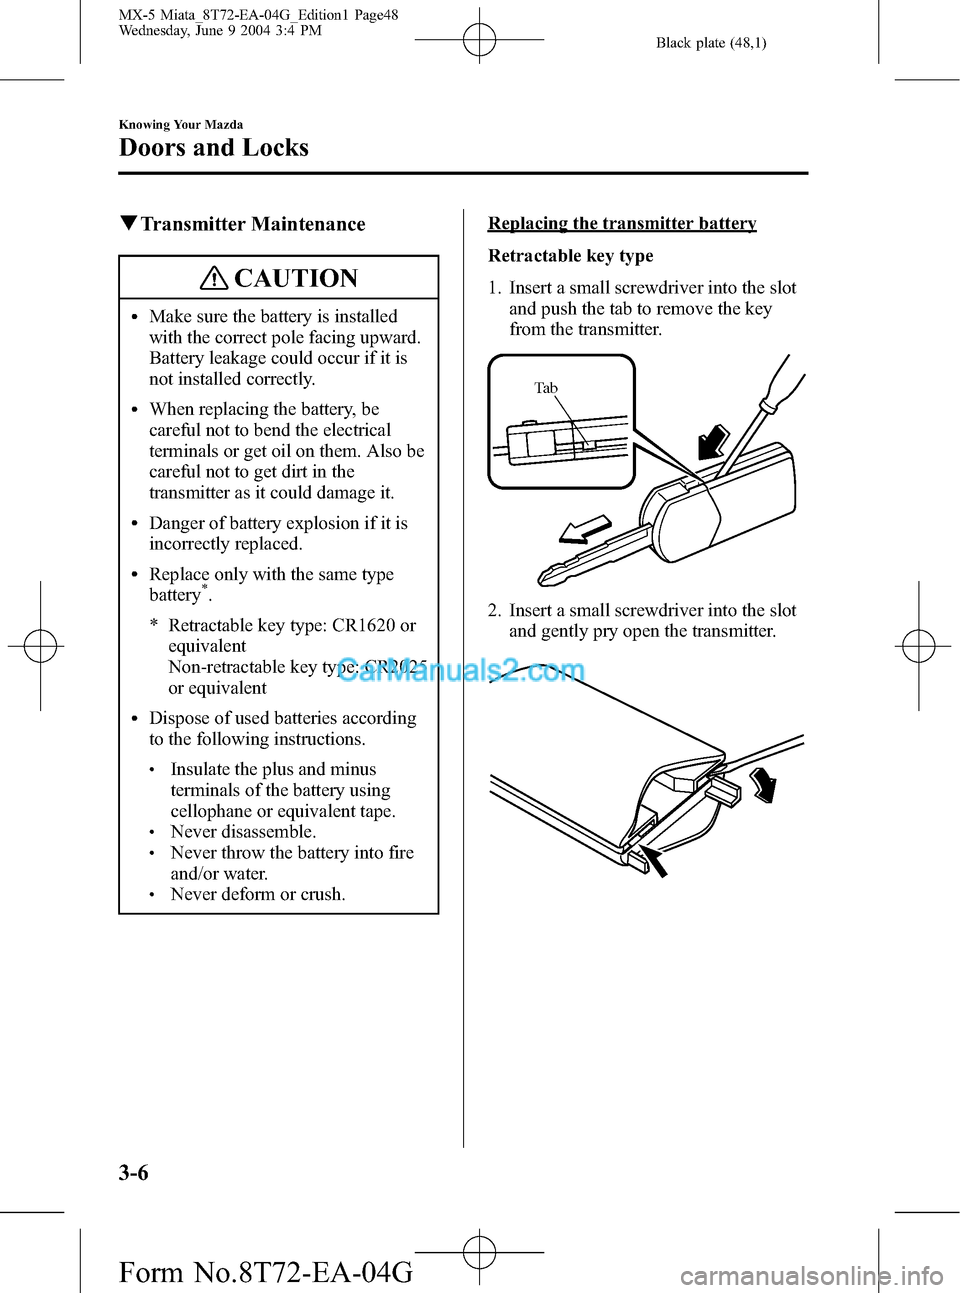 MAZDA MODEL MX-5 2005  Owners Manual (in English) Black plate (48,1)
qTransmitter Maintenance
CAUTION
lMake sure the battery is installed
with the correct pole facing upward.
Battery leakage could occur if it is
not installed correctly.
lWhen replaci